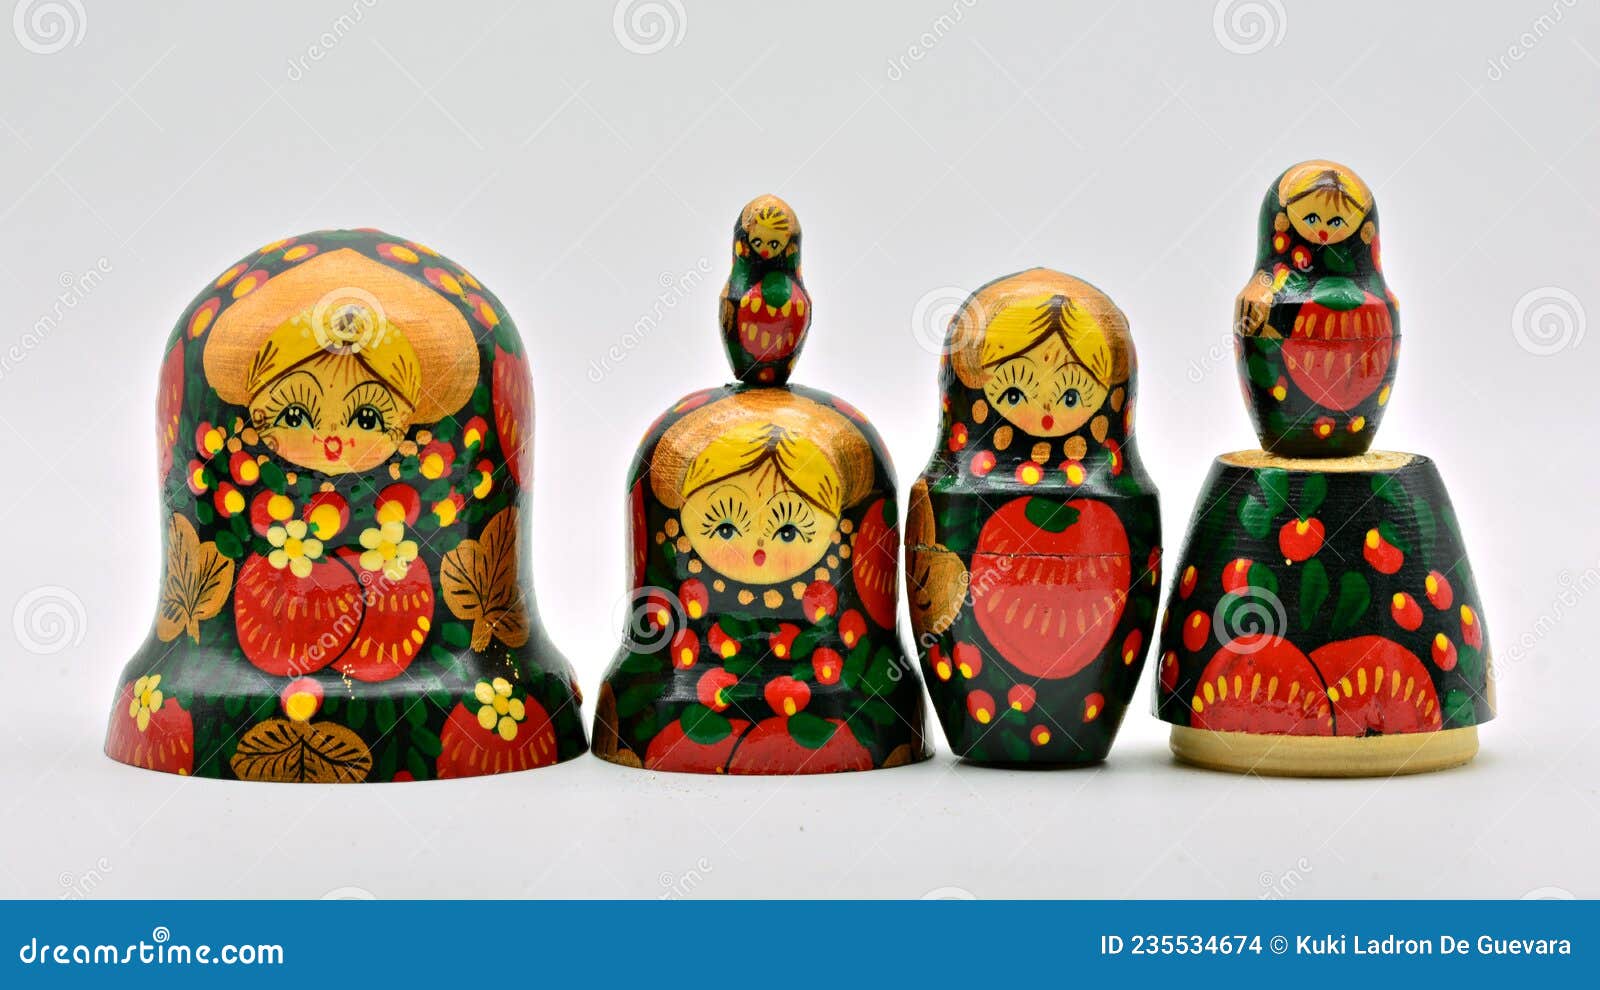 family of traditional russian dolls